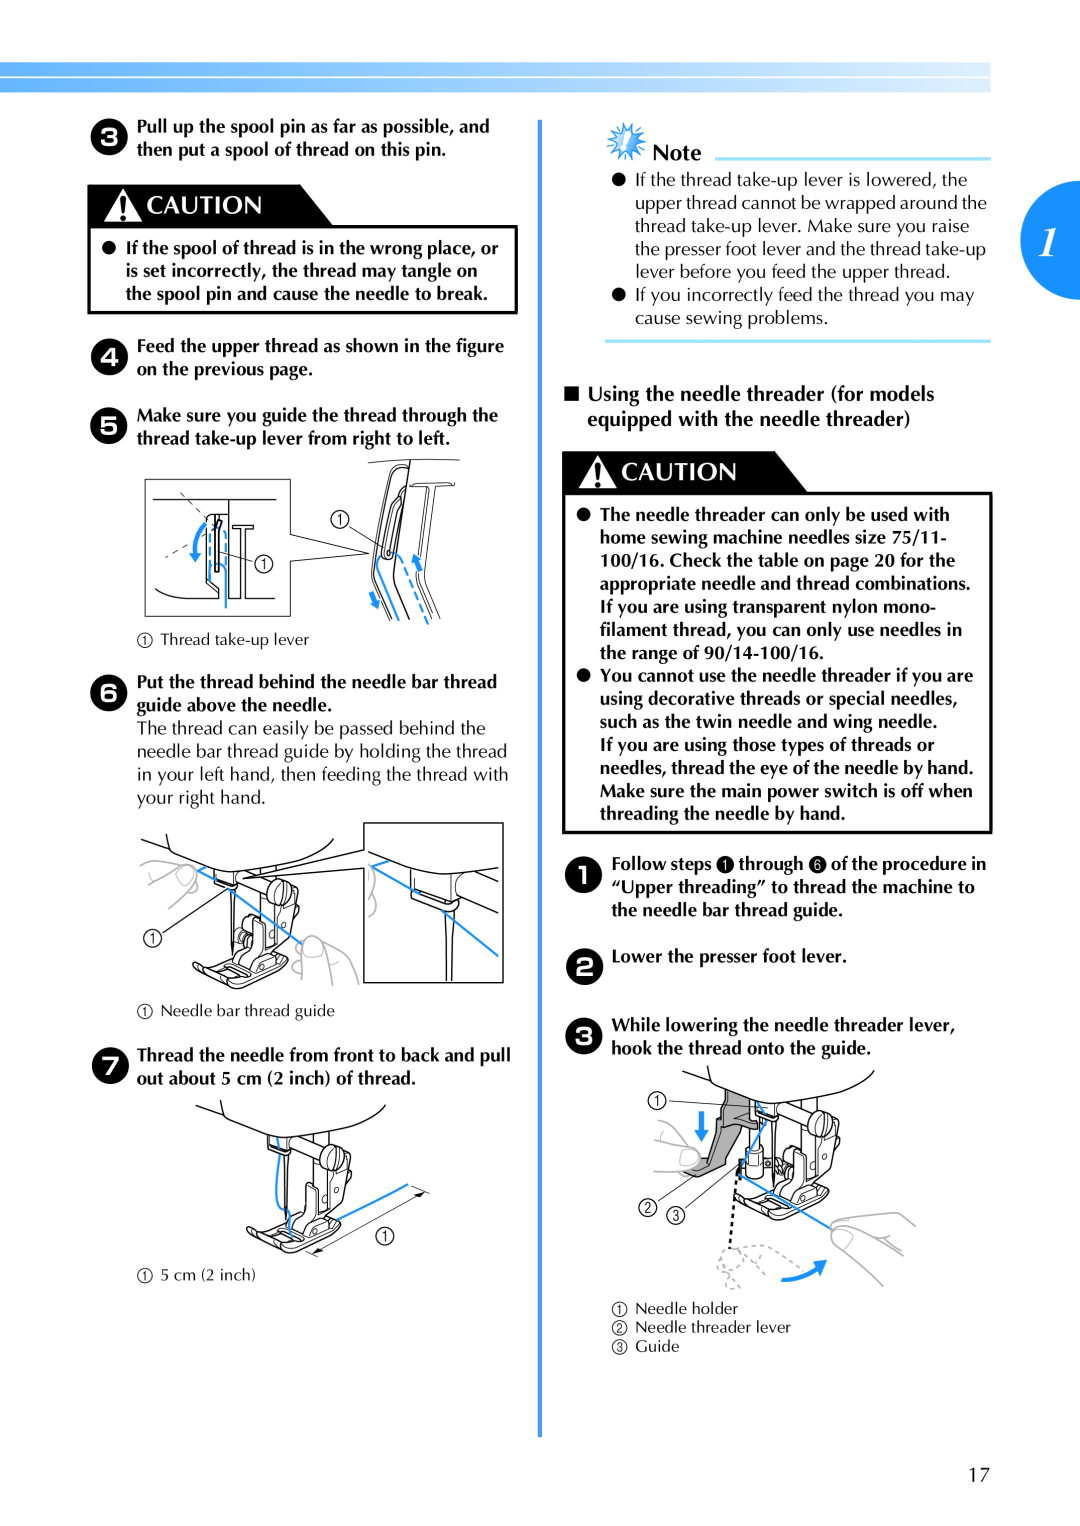 Brother CE 500PRW operation manual dFeed the upper thread as shown in the figure on the previous page 